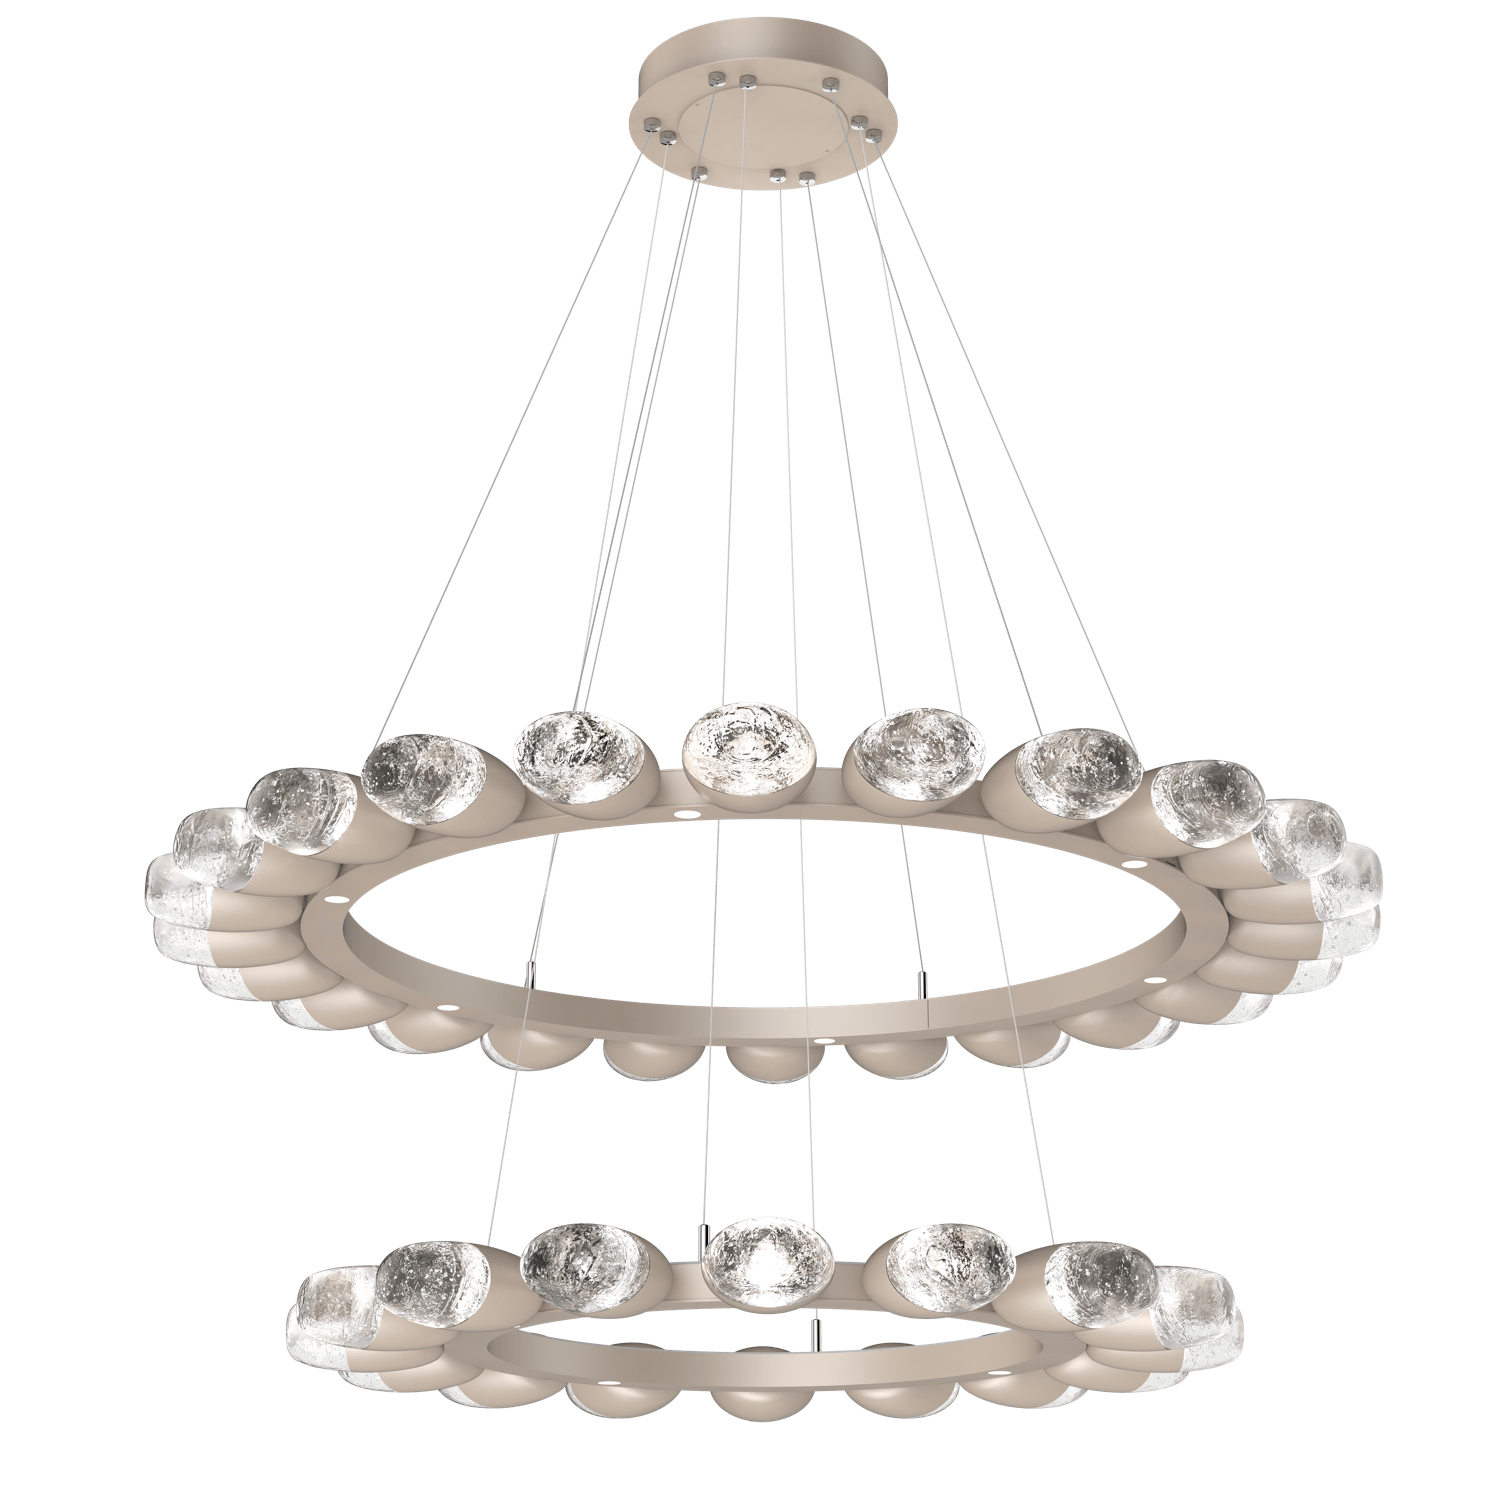 CHB0079-2T-BS-Hammerton-Studio-Pebble-48-inch-two-tier-radial-ring-chandelier-with-metallic-beige-silver-finish-and-clear-cast-glass-shades-and-LED-lamping